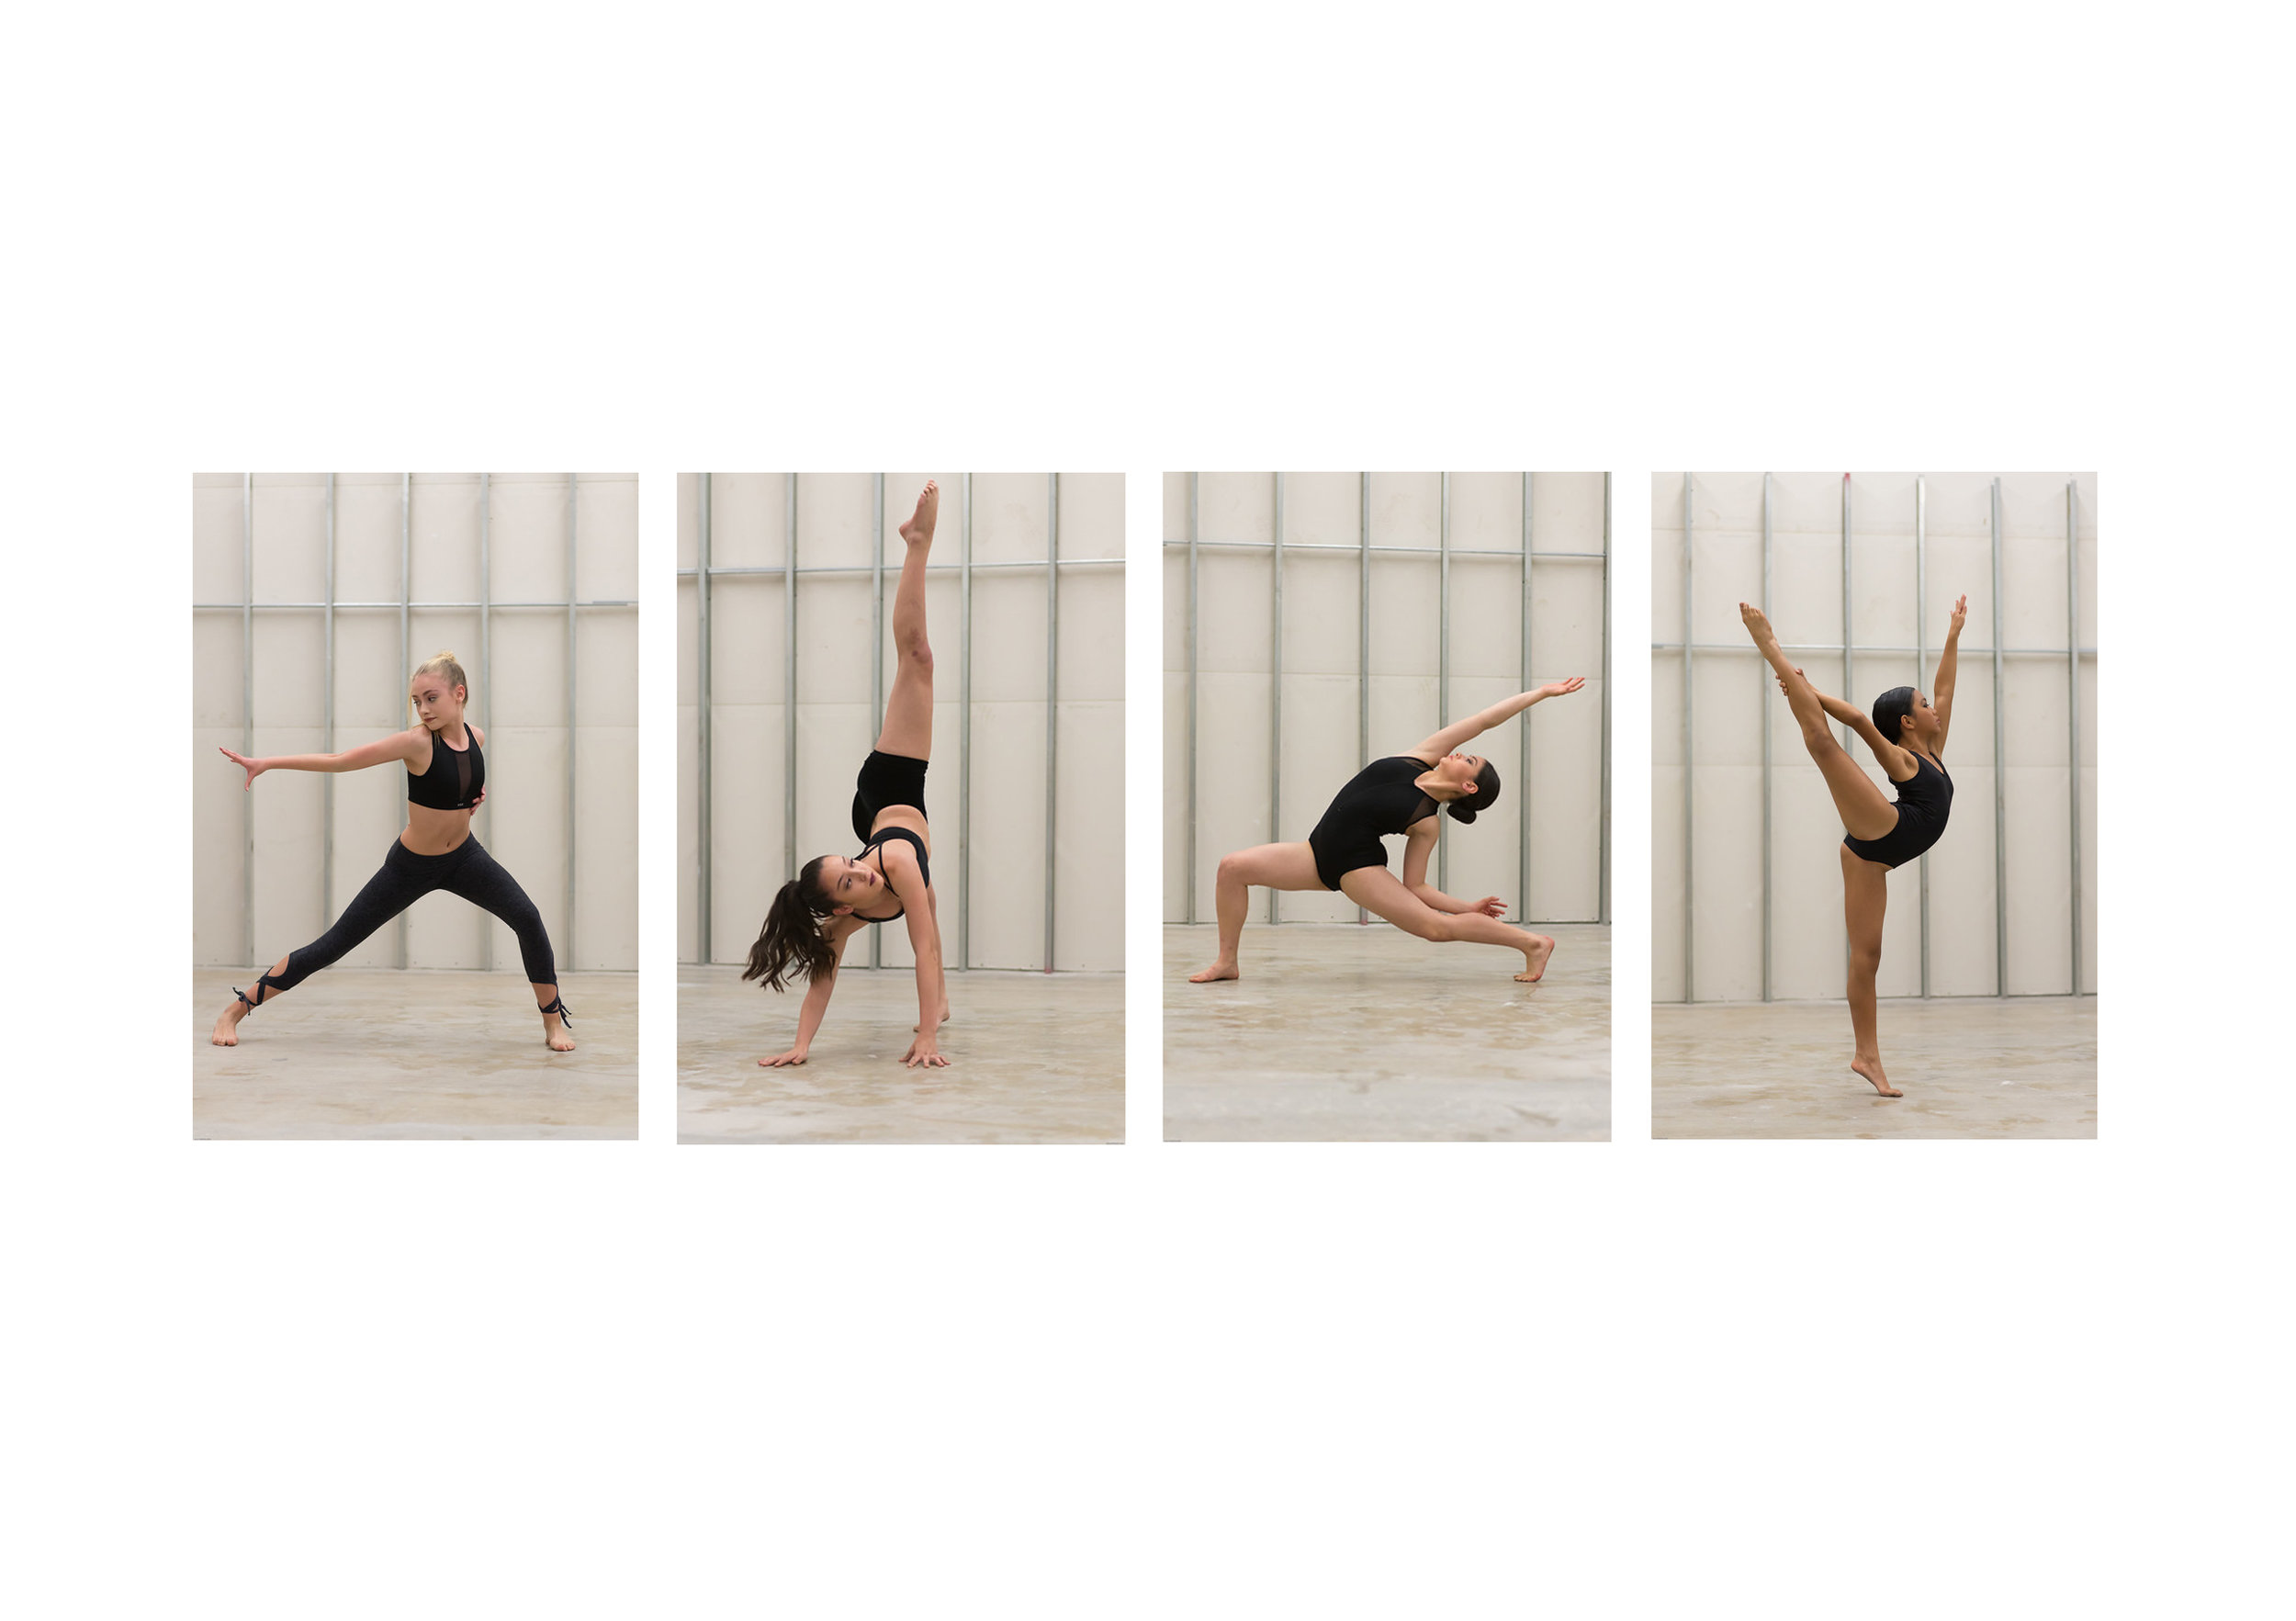 4 images of dancers holding dance poses